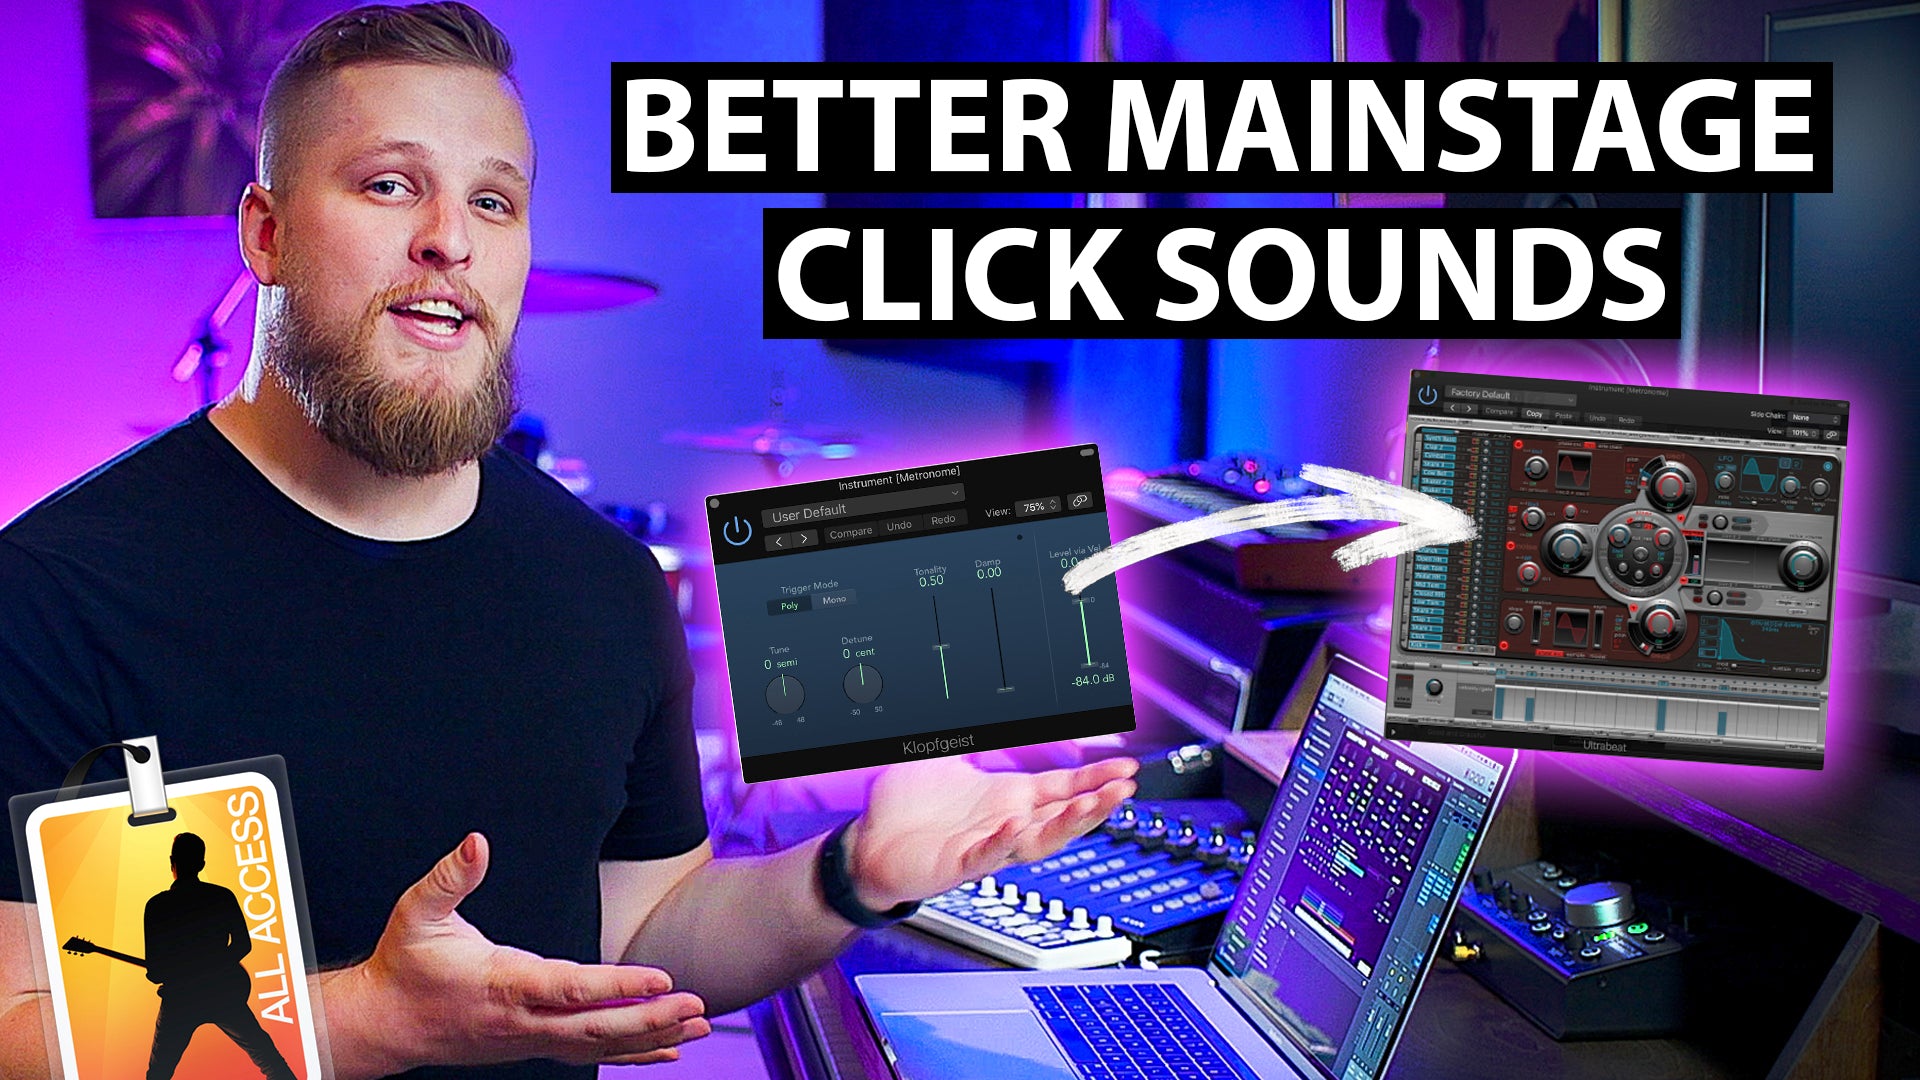 MainStage Metronome Tutorial: How to Change the Click Sound In MainStage